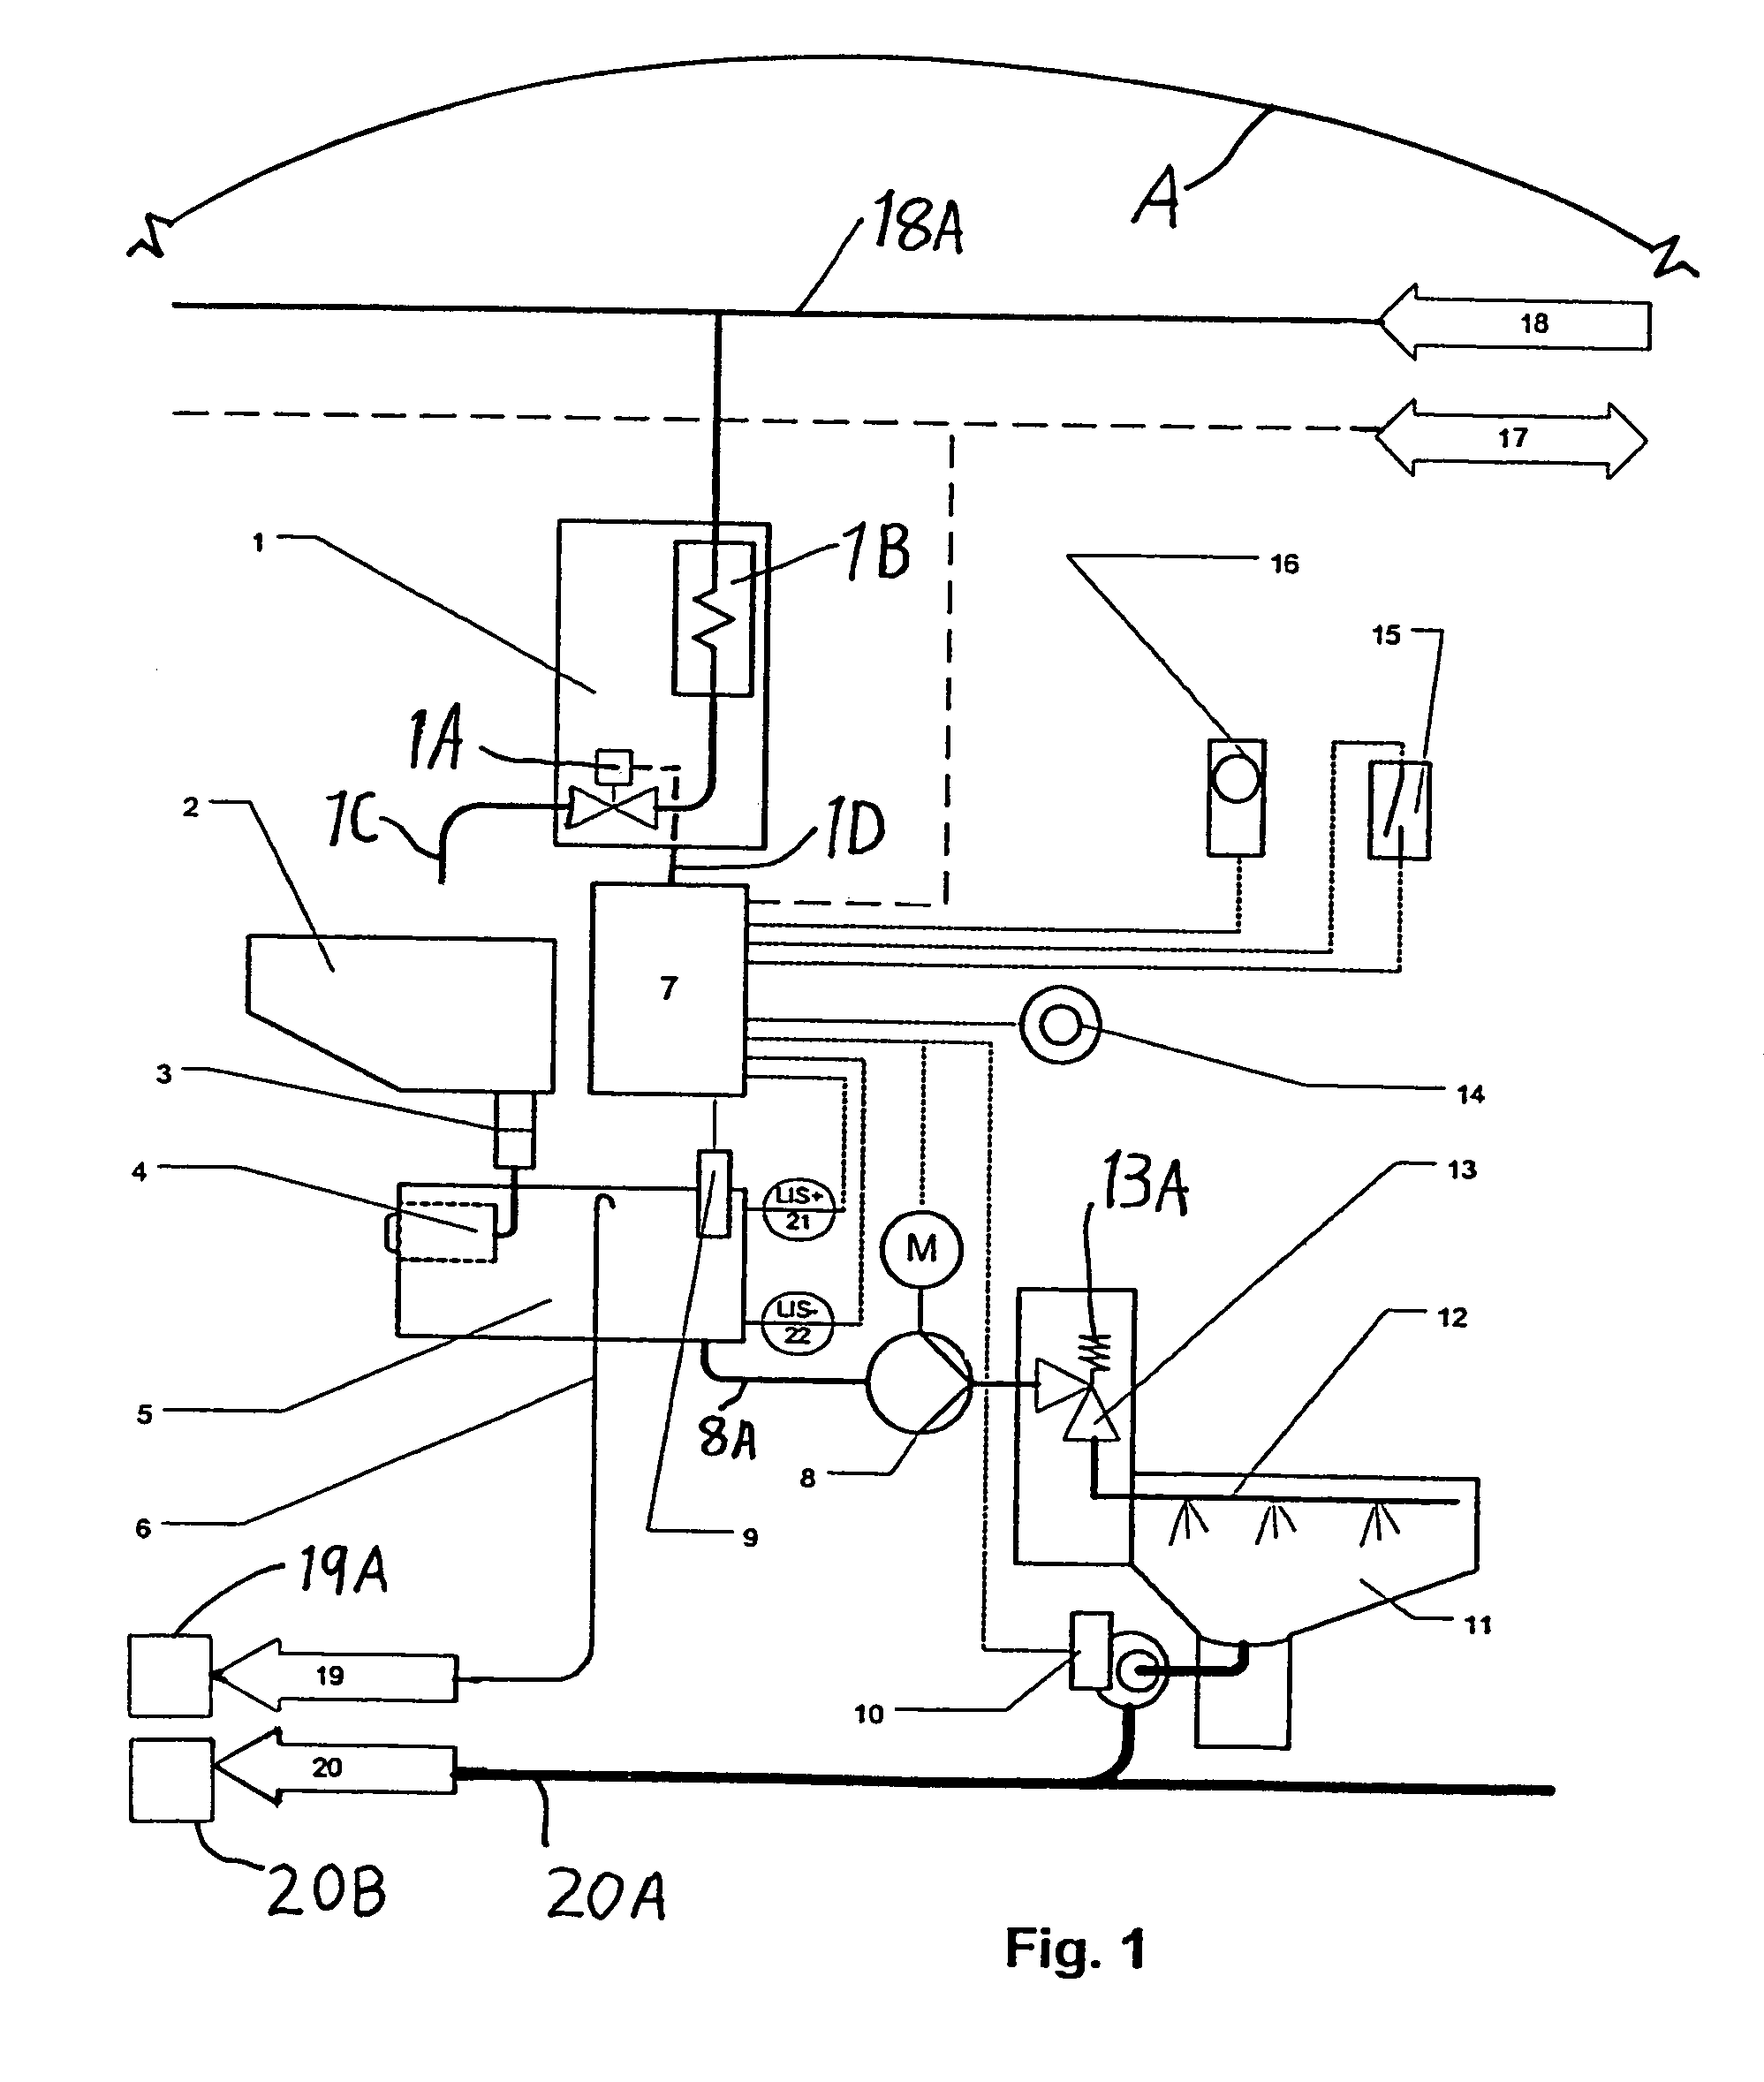 Method and apparatus for processing and re-using of gray water for flushing toilets